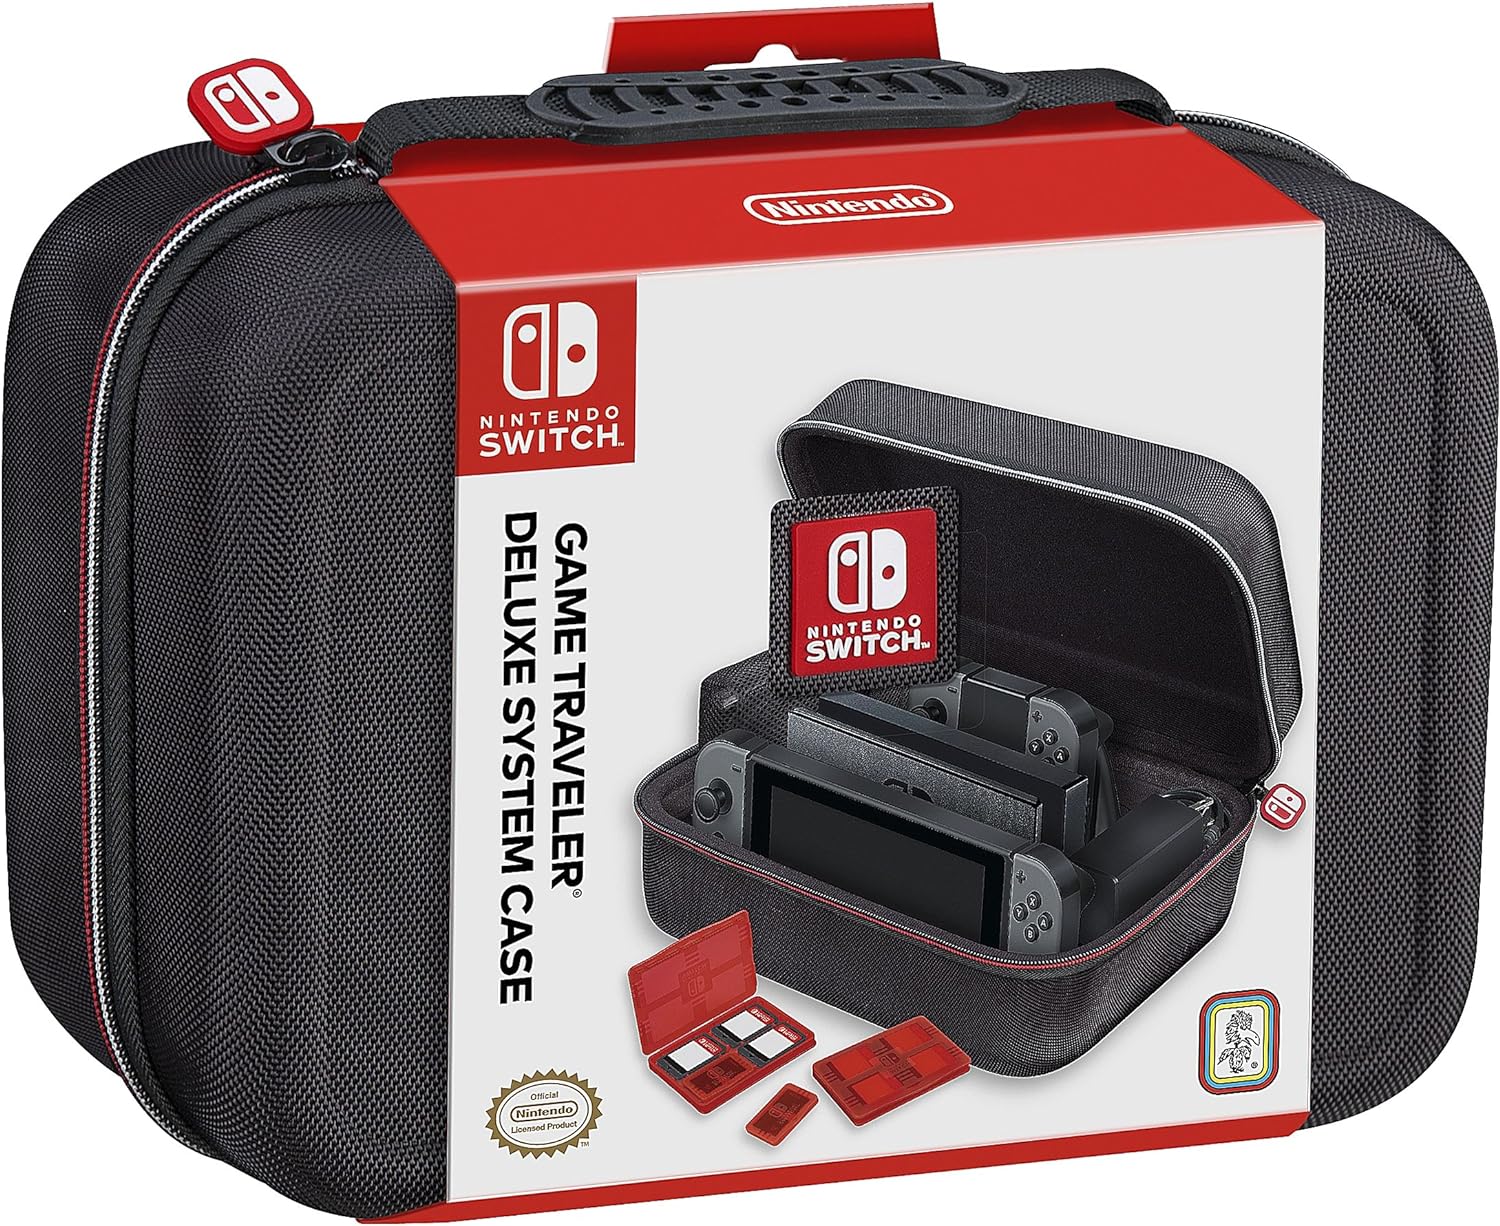 RDS Industries Nintendo Switch System Carrying Case Protective Deluxe Travel System Case Black Ballistic Nylon Exterior Official Nintendo Licensed Product*